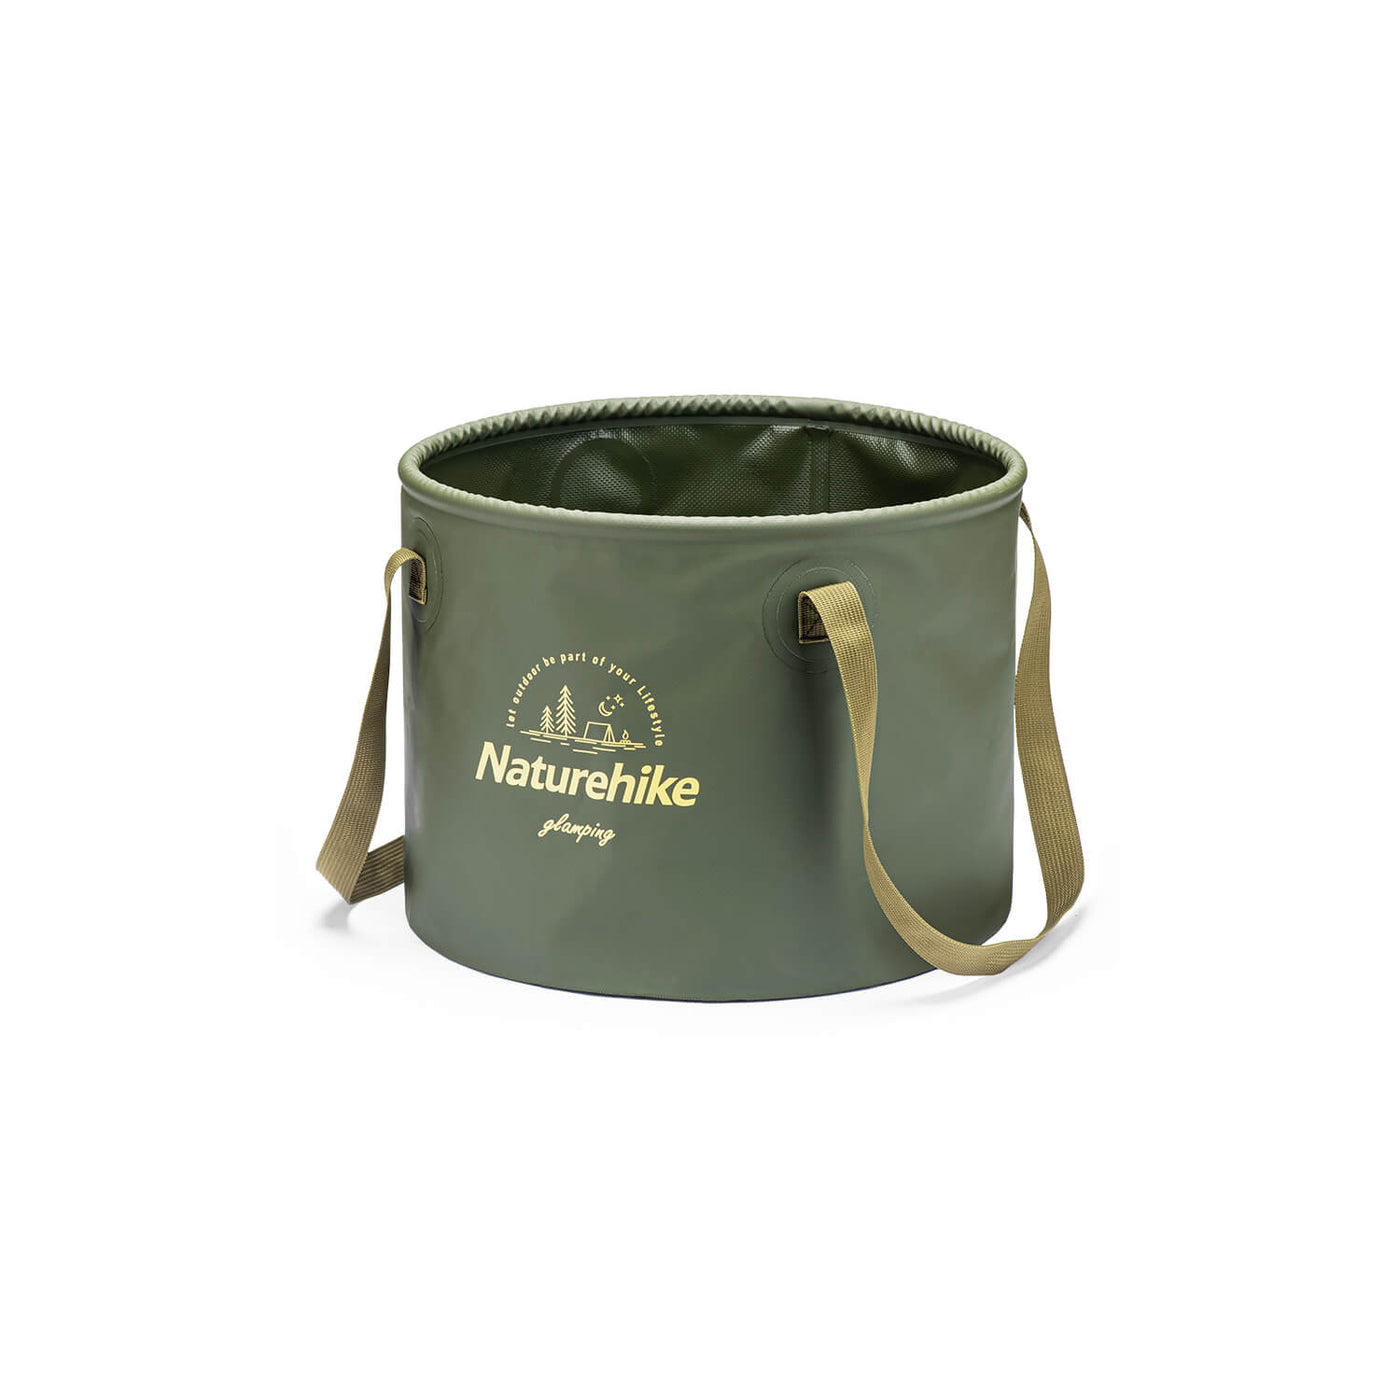 Collapsible round bucket